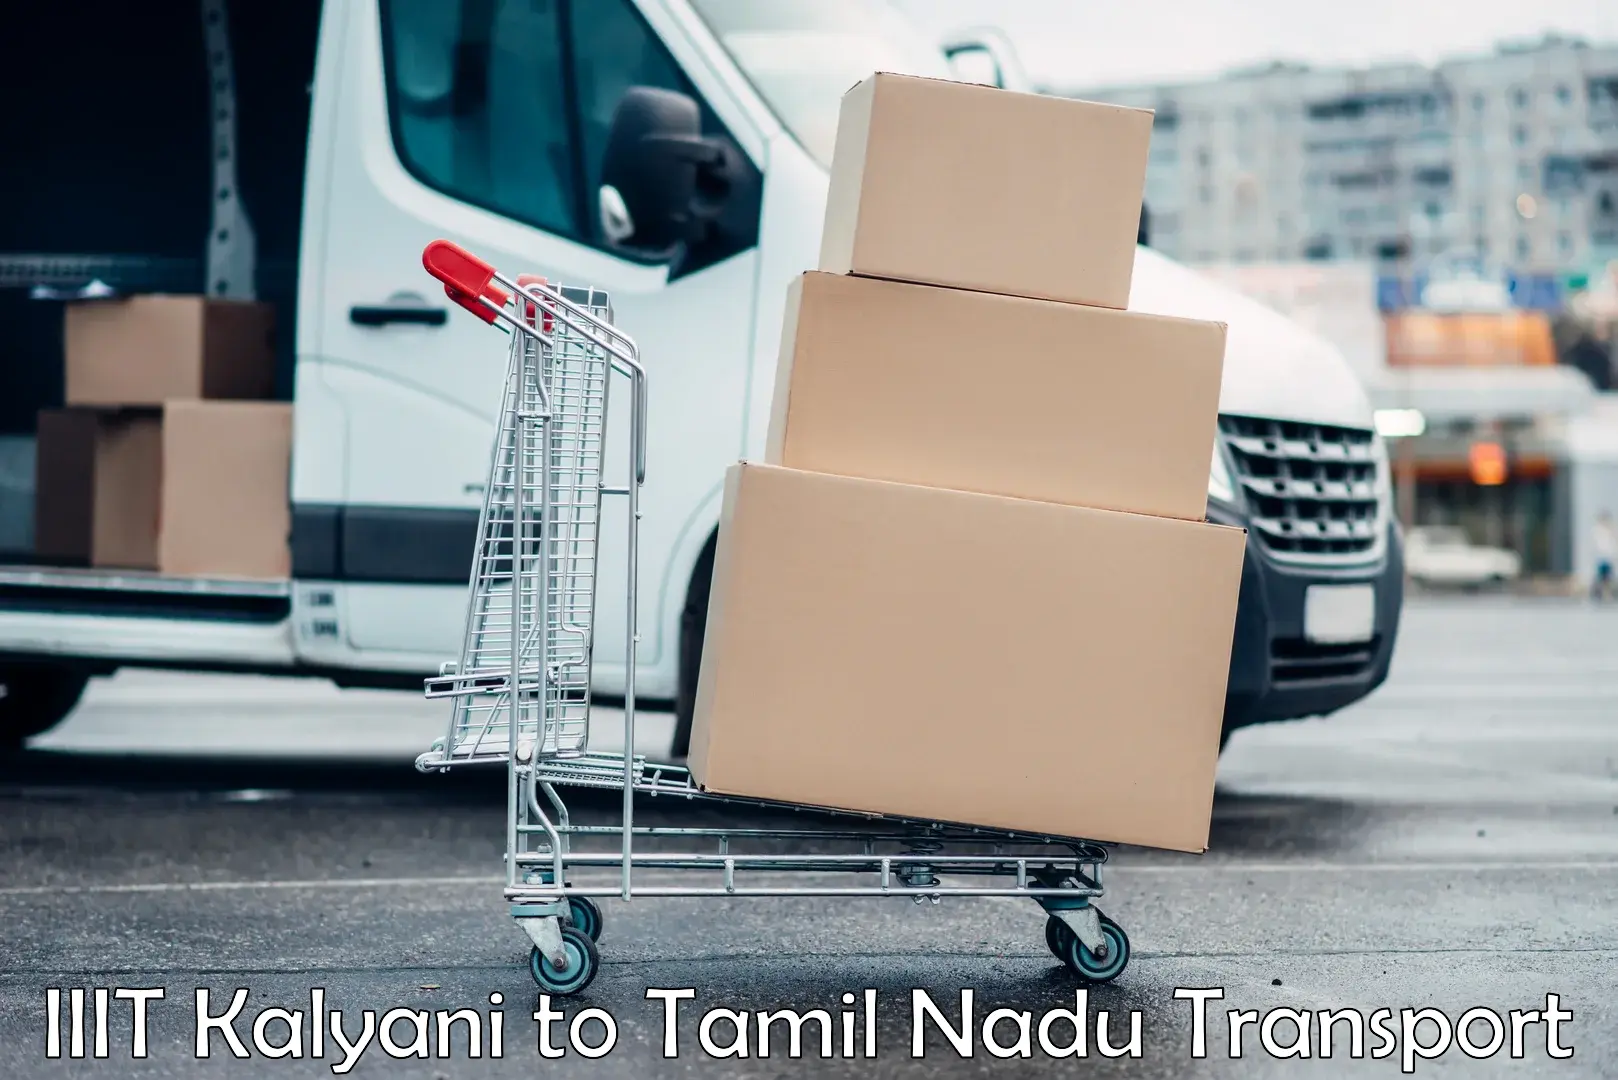 Daily parcel service transport IIIT Kalyani to Saveetha Institute of Medical and Technical Sciences Chennai